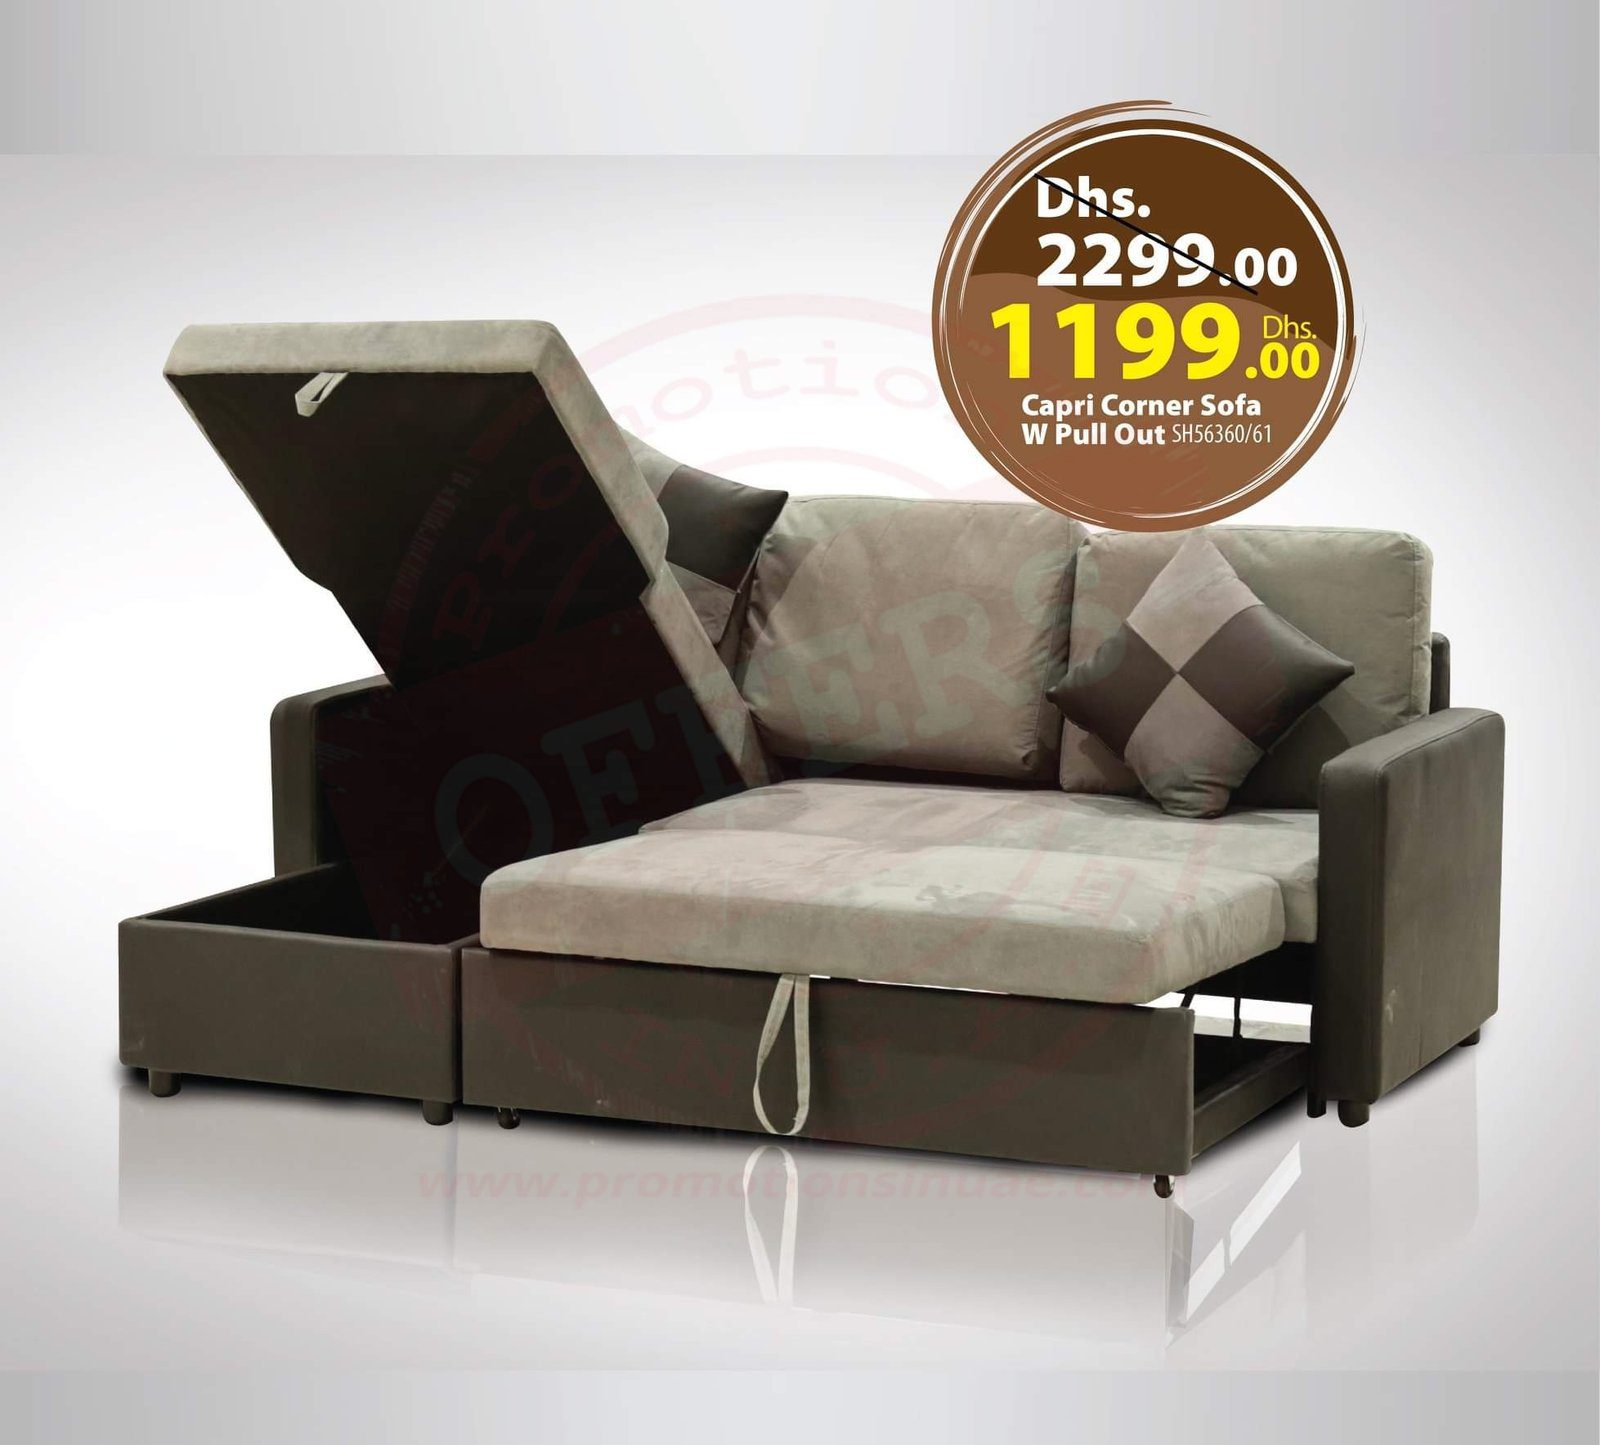 FB IMG 1553432277670 Offer at Home Style UAE